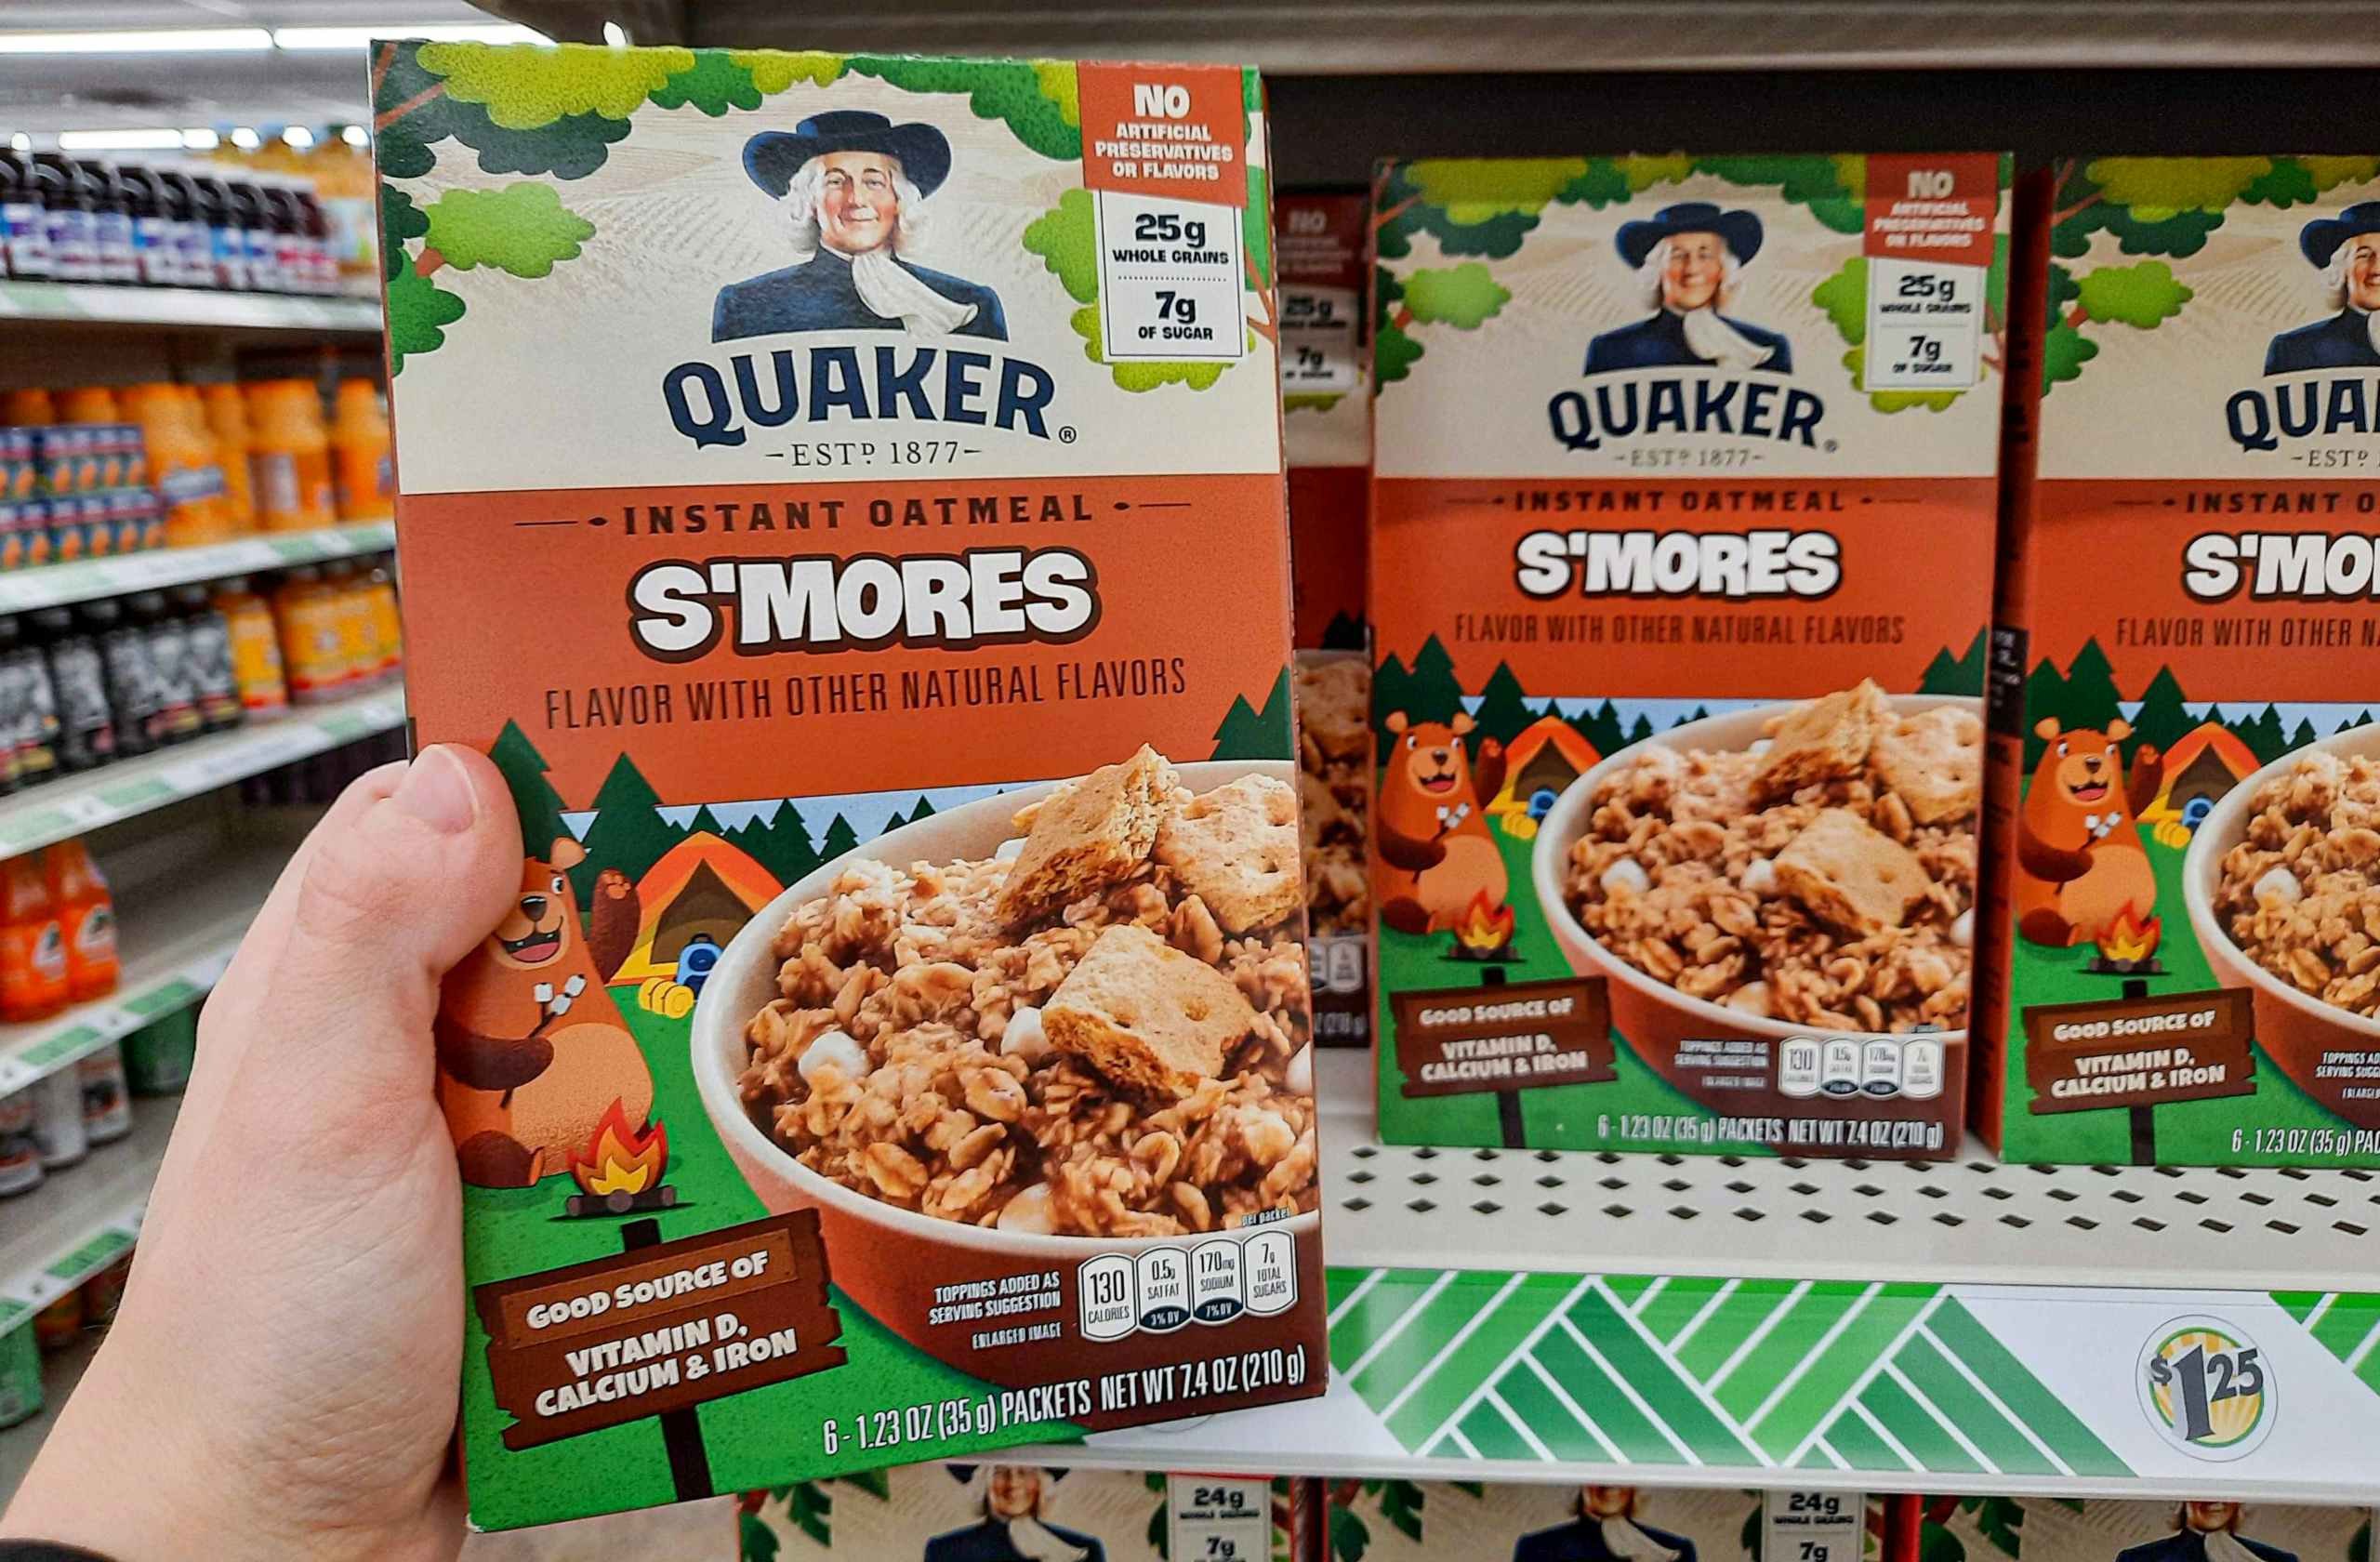 Quaker Oatmeal S'mores flavor at Dollar Tree